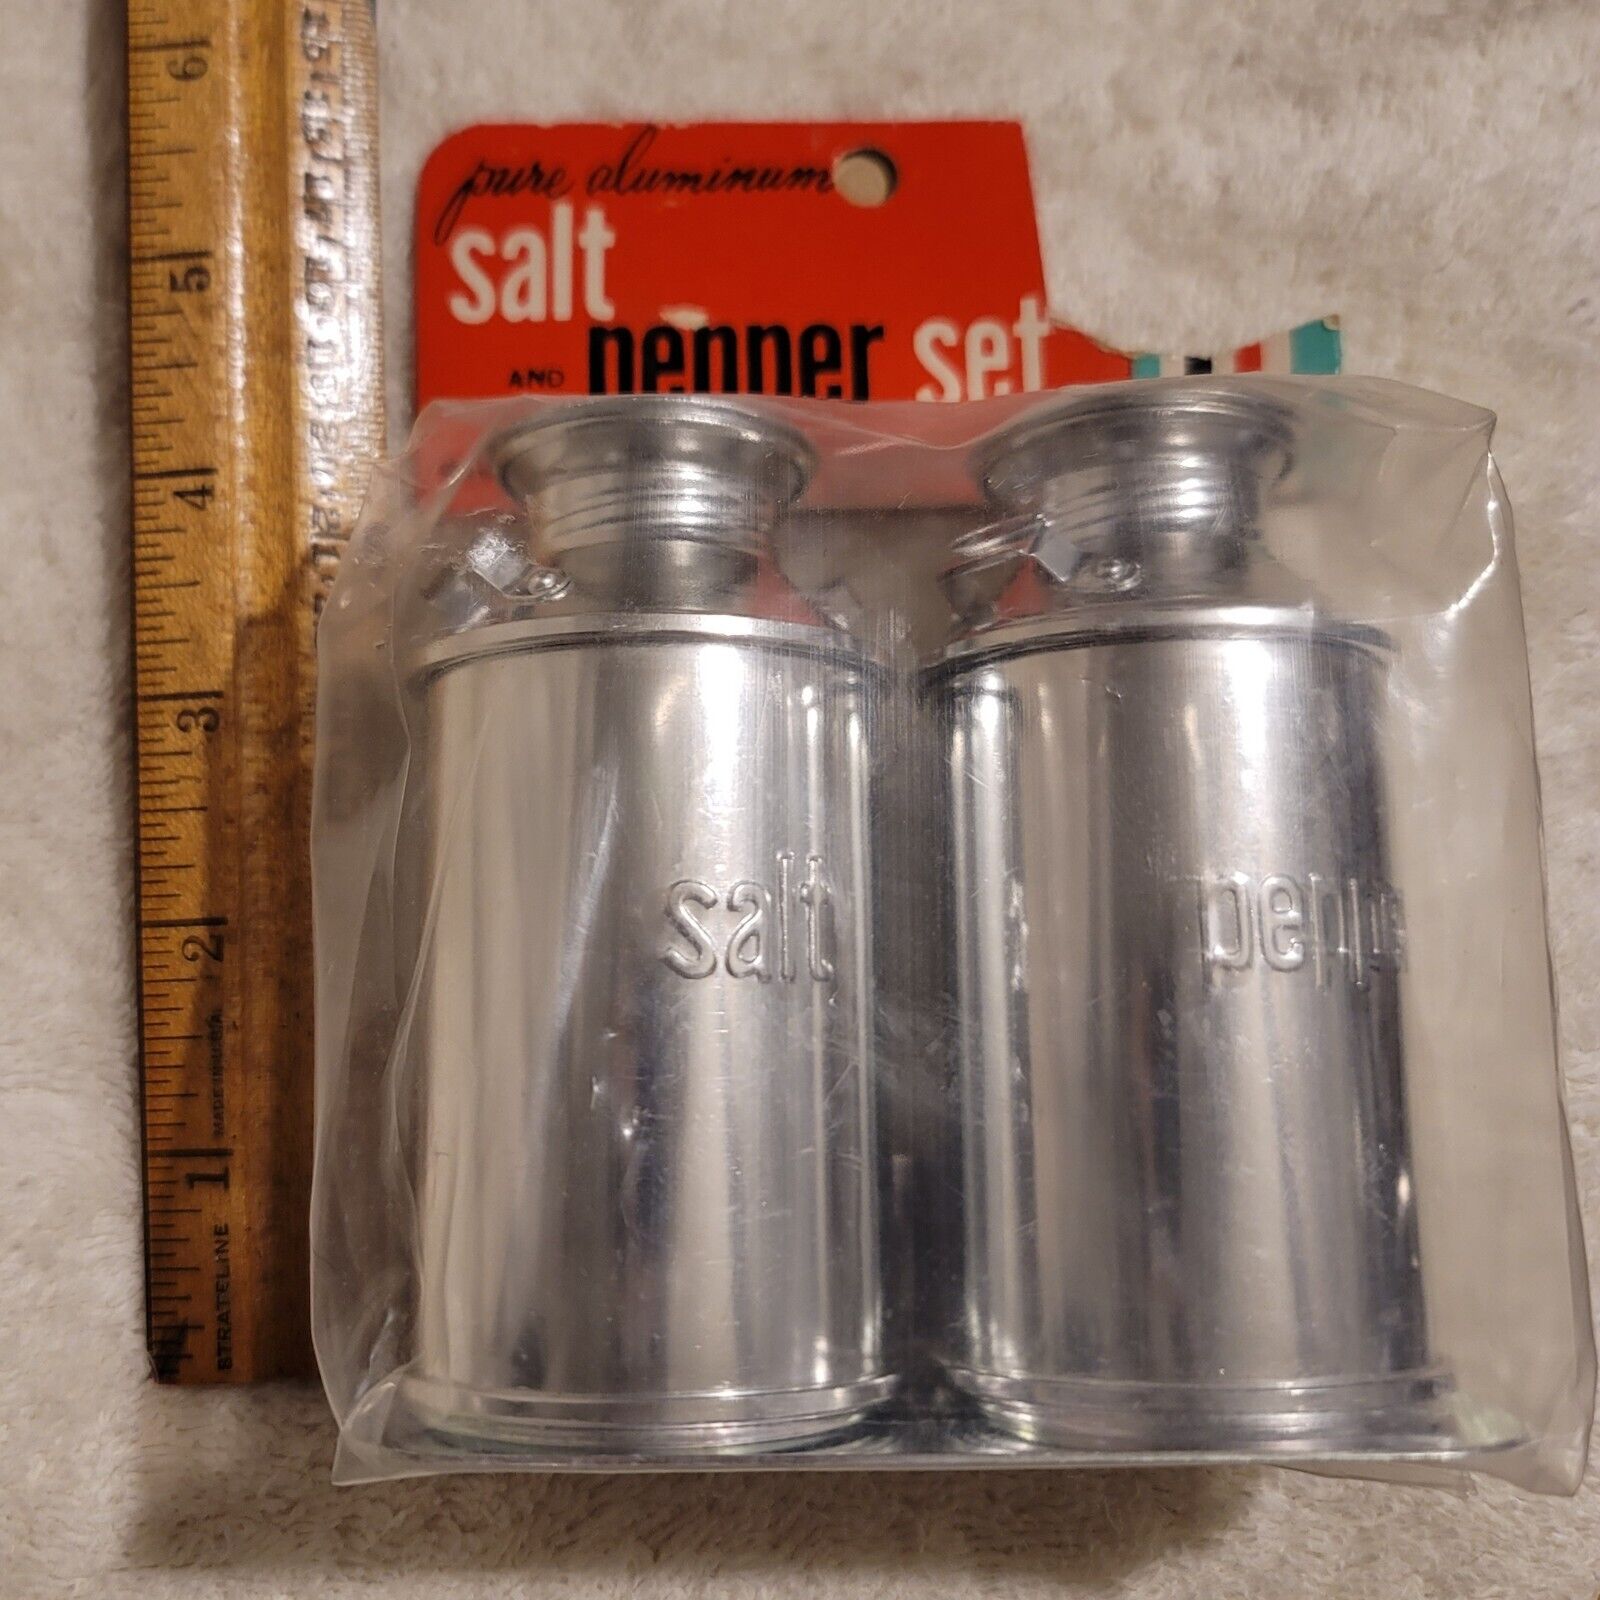 Vintage Anodized Aluminum Dairy Cans Salt & Pepper Set w/ Wall Bracket Stand New